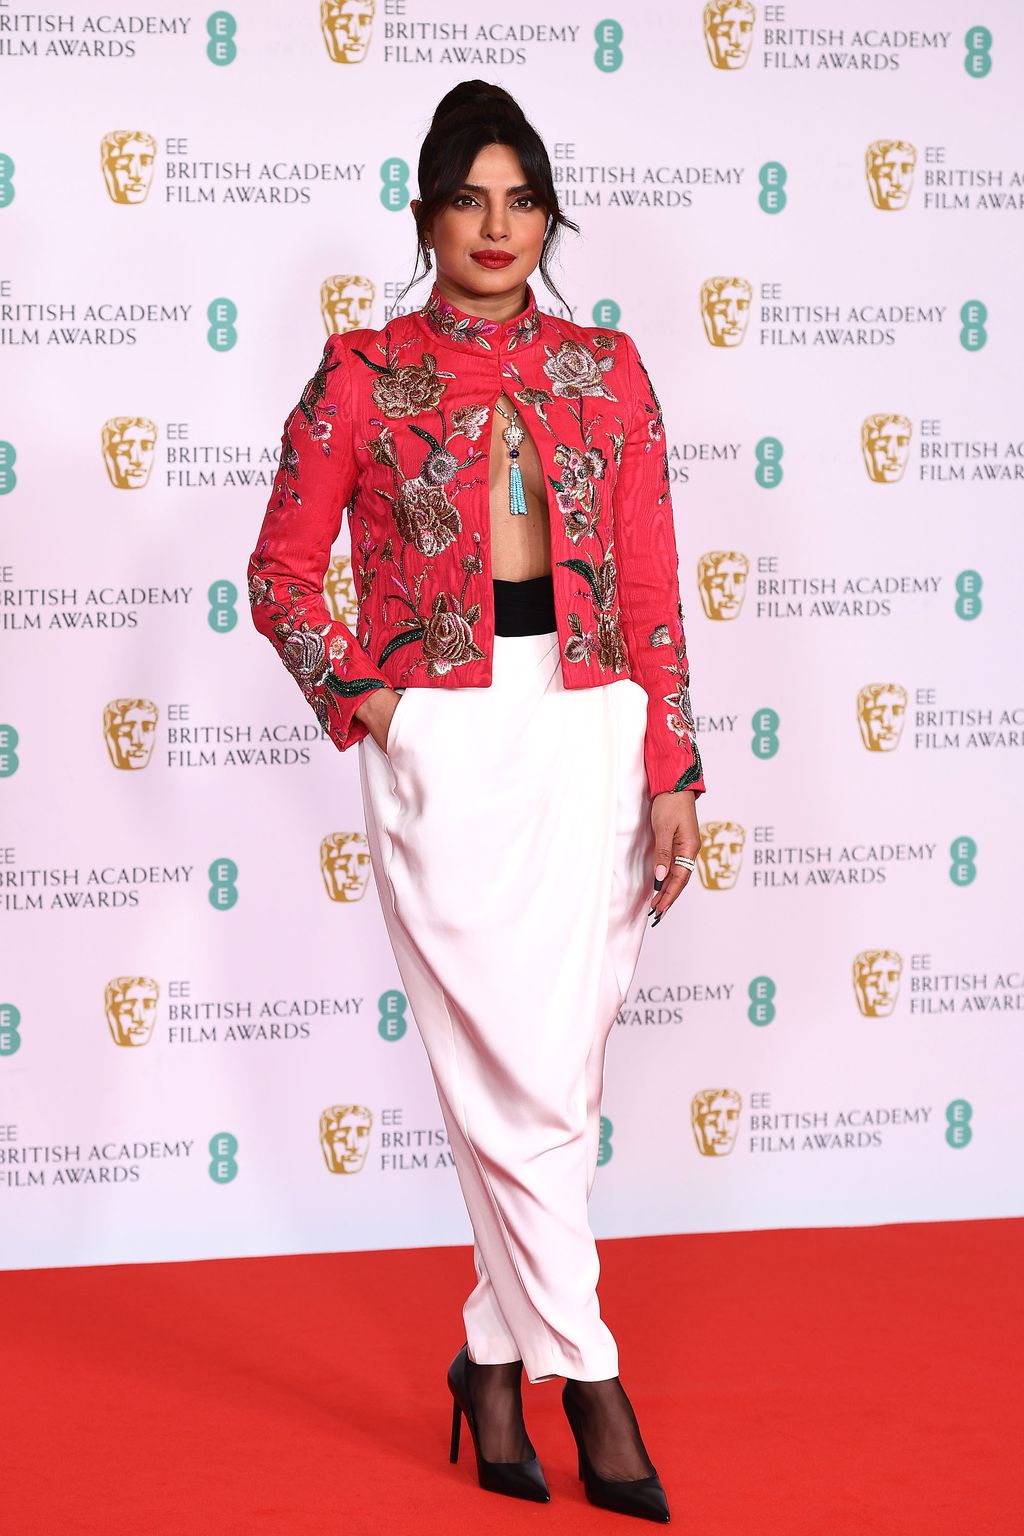 LONDON, ENGLAND - APRIL 11: Awards Presenter Priyanka Chopra Jonas attends the EE British Academy Film Awards 2021 at the Royal Albert Hall on April 11, 2021 in London, England. (Photo by Jeff Spicer/Getty Images)